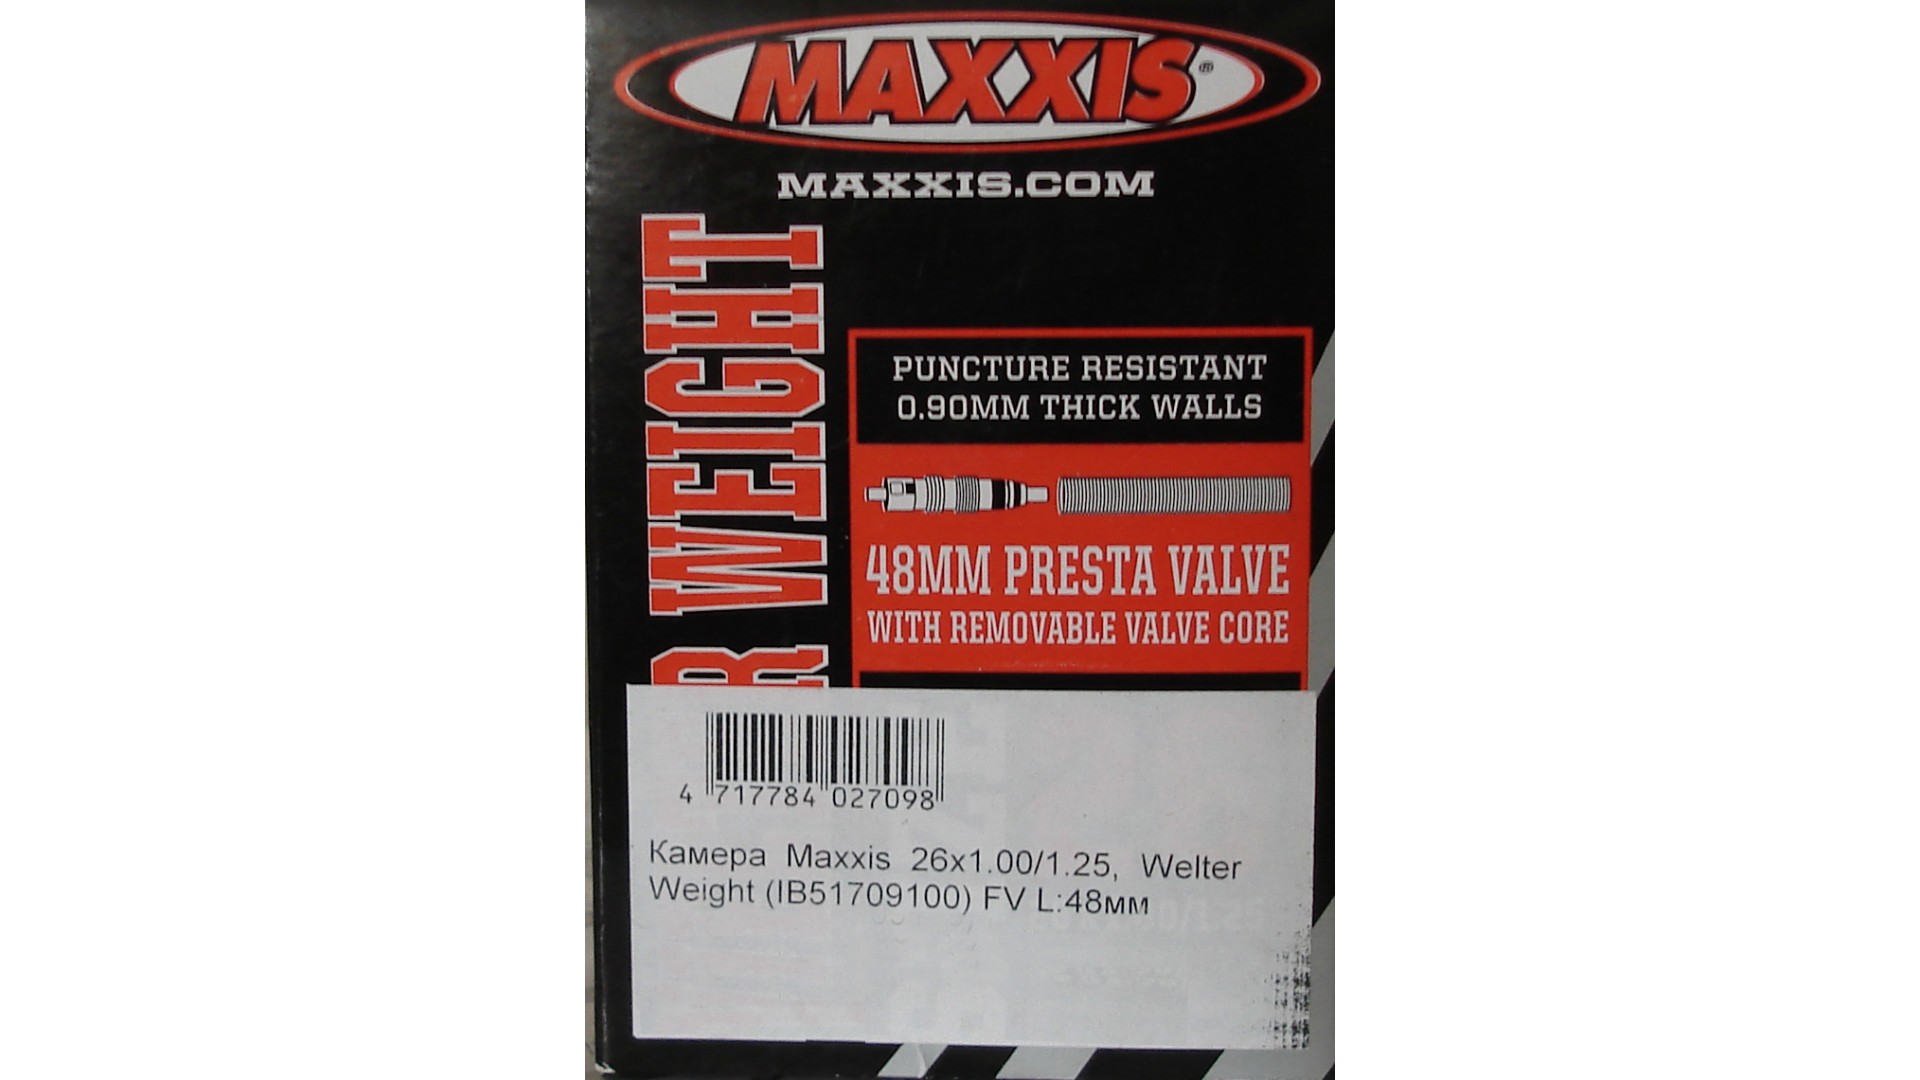 Камера Maxxis 26x1.00/1.25, Welter Weight FV L:48мм